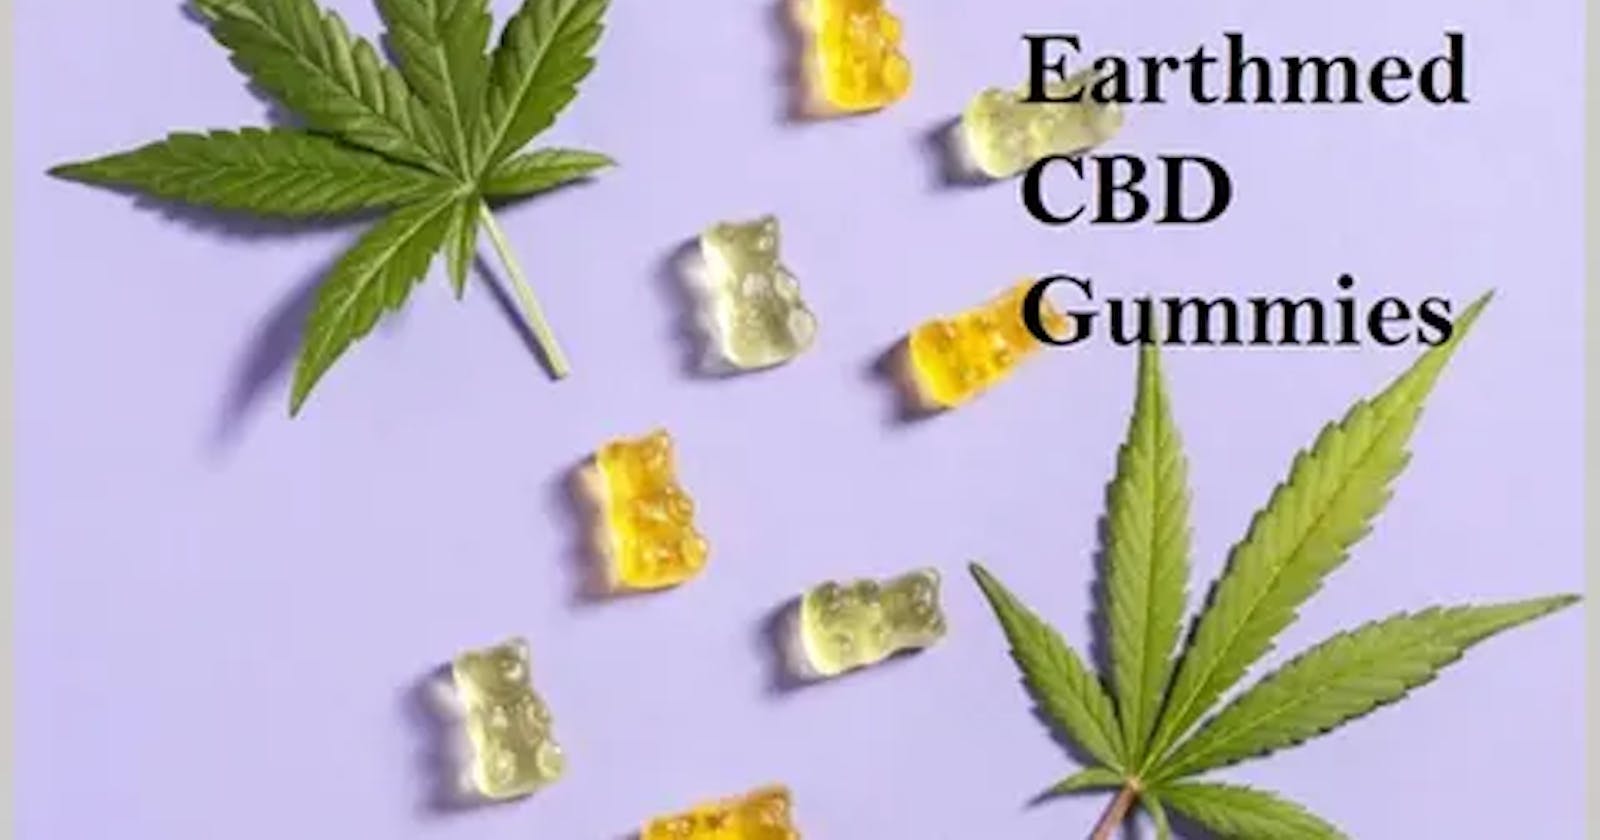 Earth Med CBD Gummies Reviews | Is It Safe Or Not?